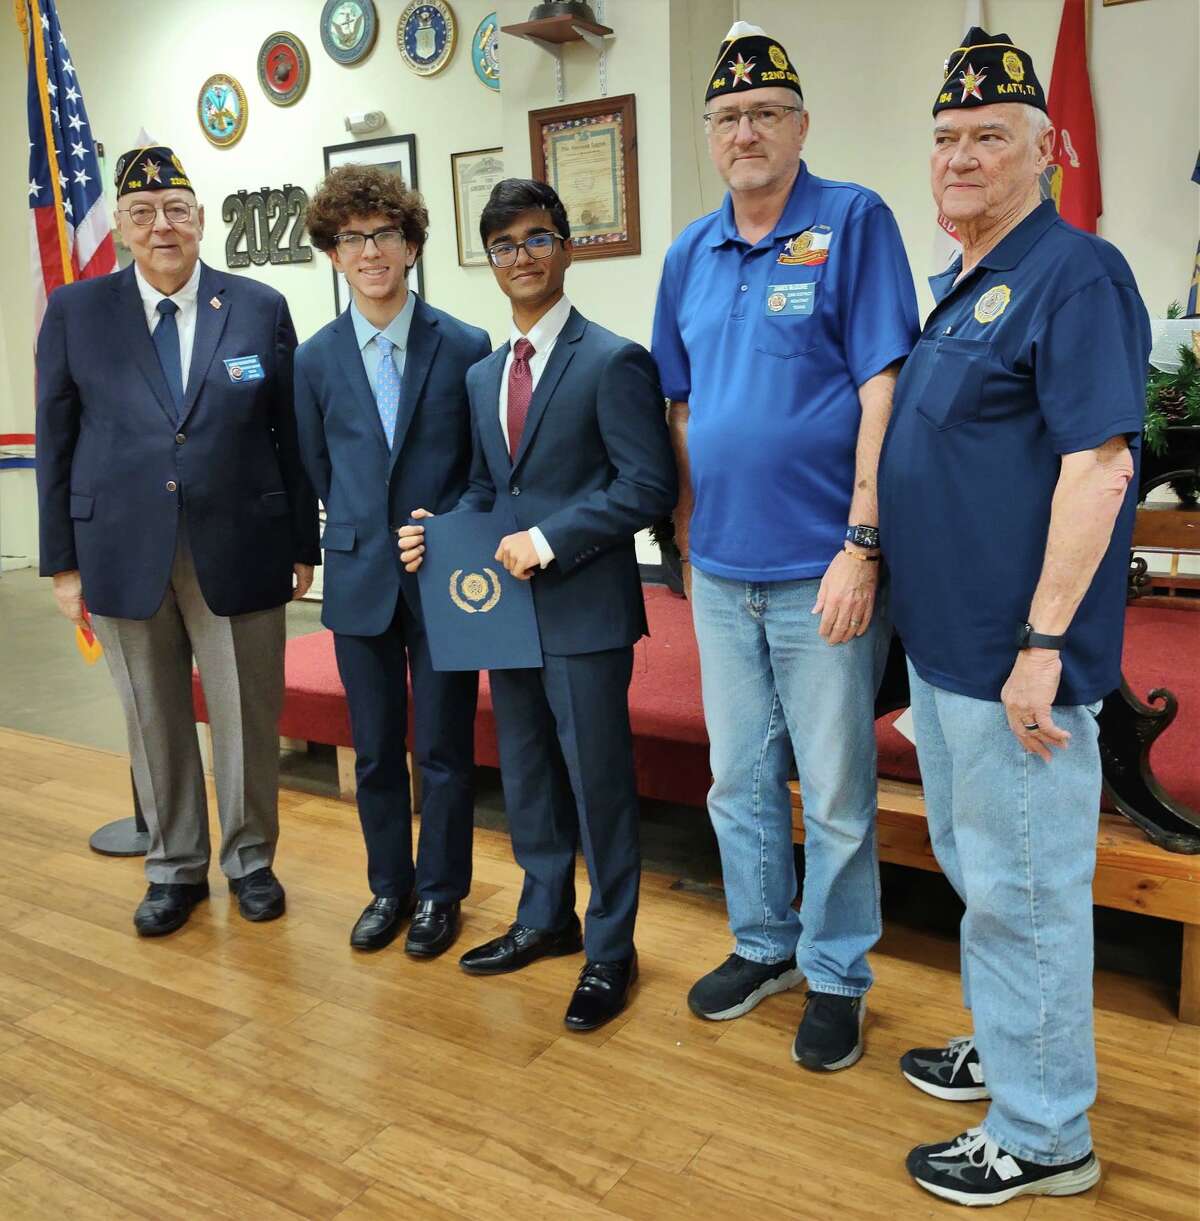 Pictured from left are Harry Woodstrom, Commander of the American Legion 22nd District Department of Texas; Tyler Crivella from Seven Lakes High School; Daniel Rupawalla from Obra D. Tompkins High School; Jim McGuire, adjutant; and Ted Whiteman from American Legion Post 164. Rupawalla was recently deemed the winner of the 22nd District Department of Texas American Legion Oratorical Contest.